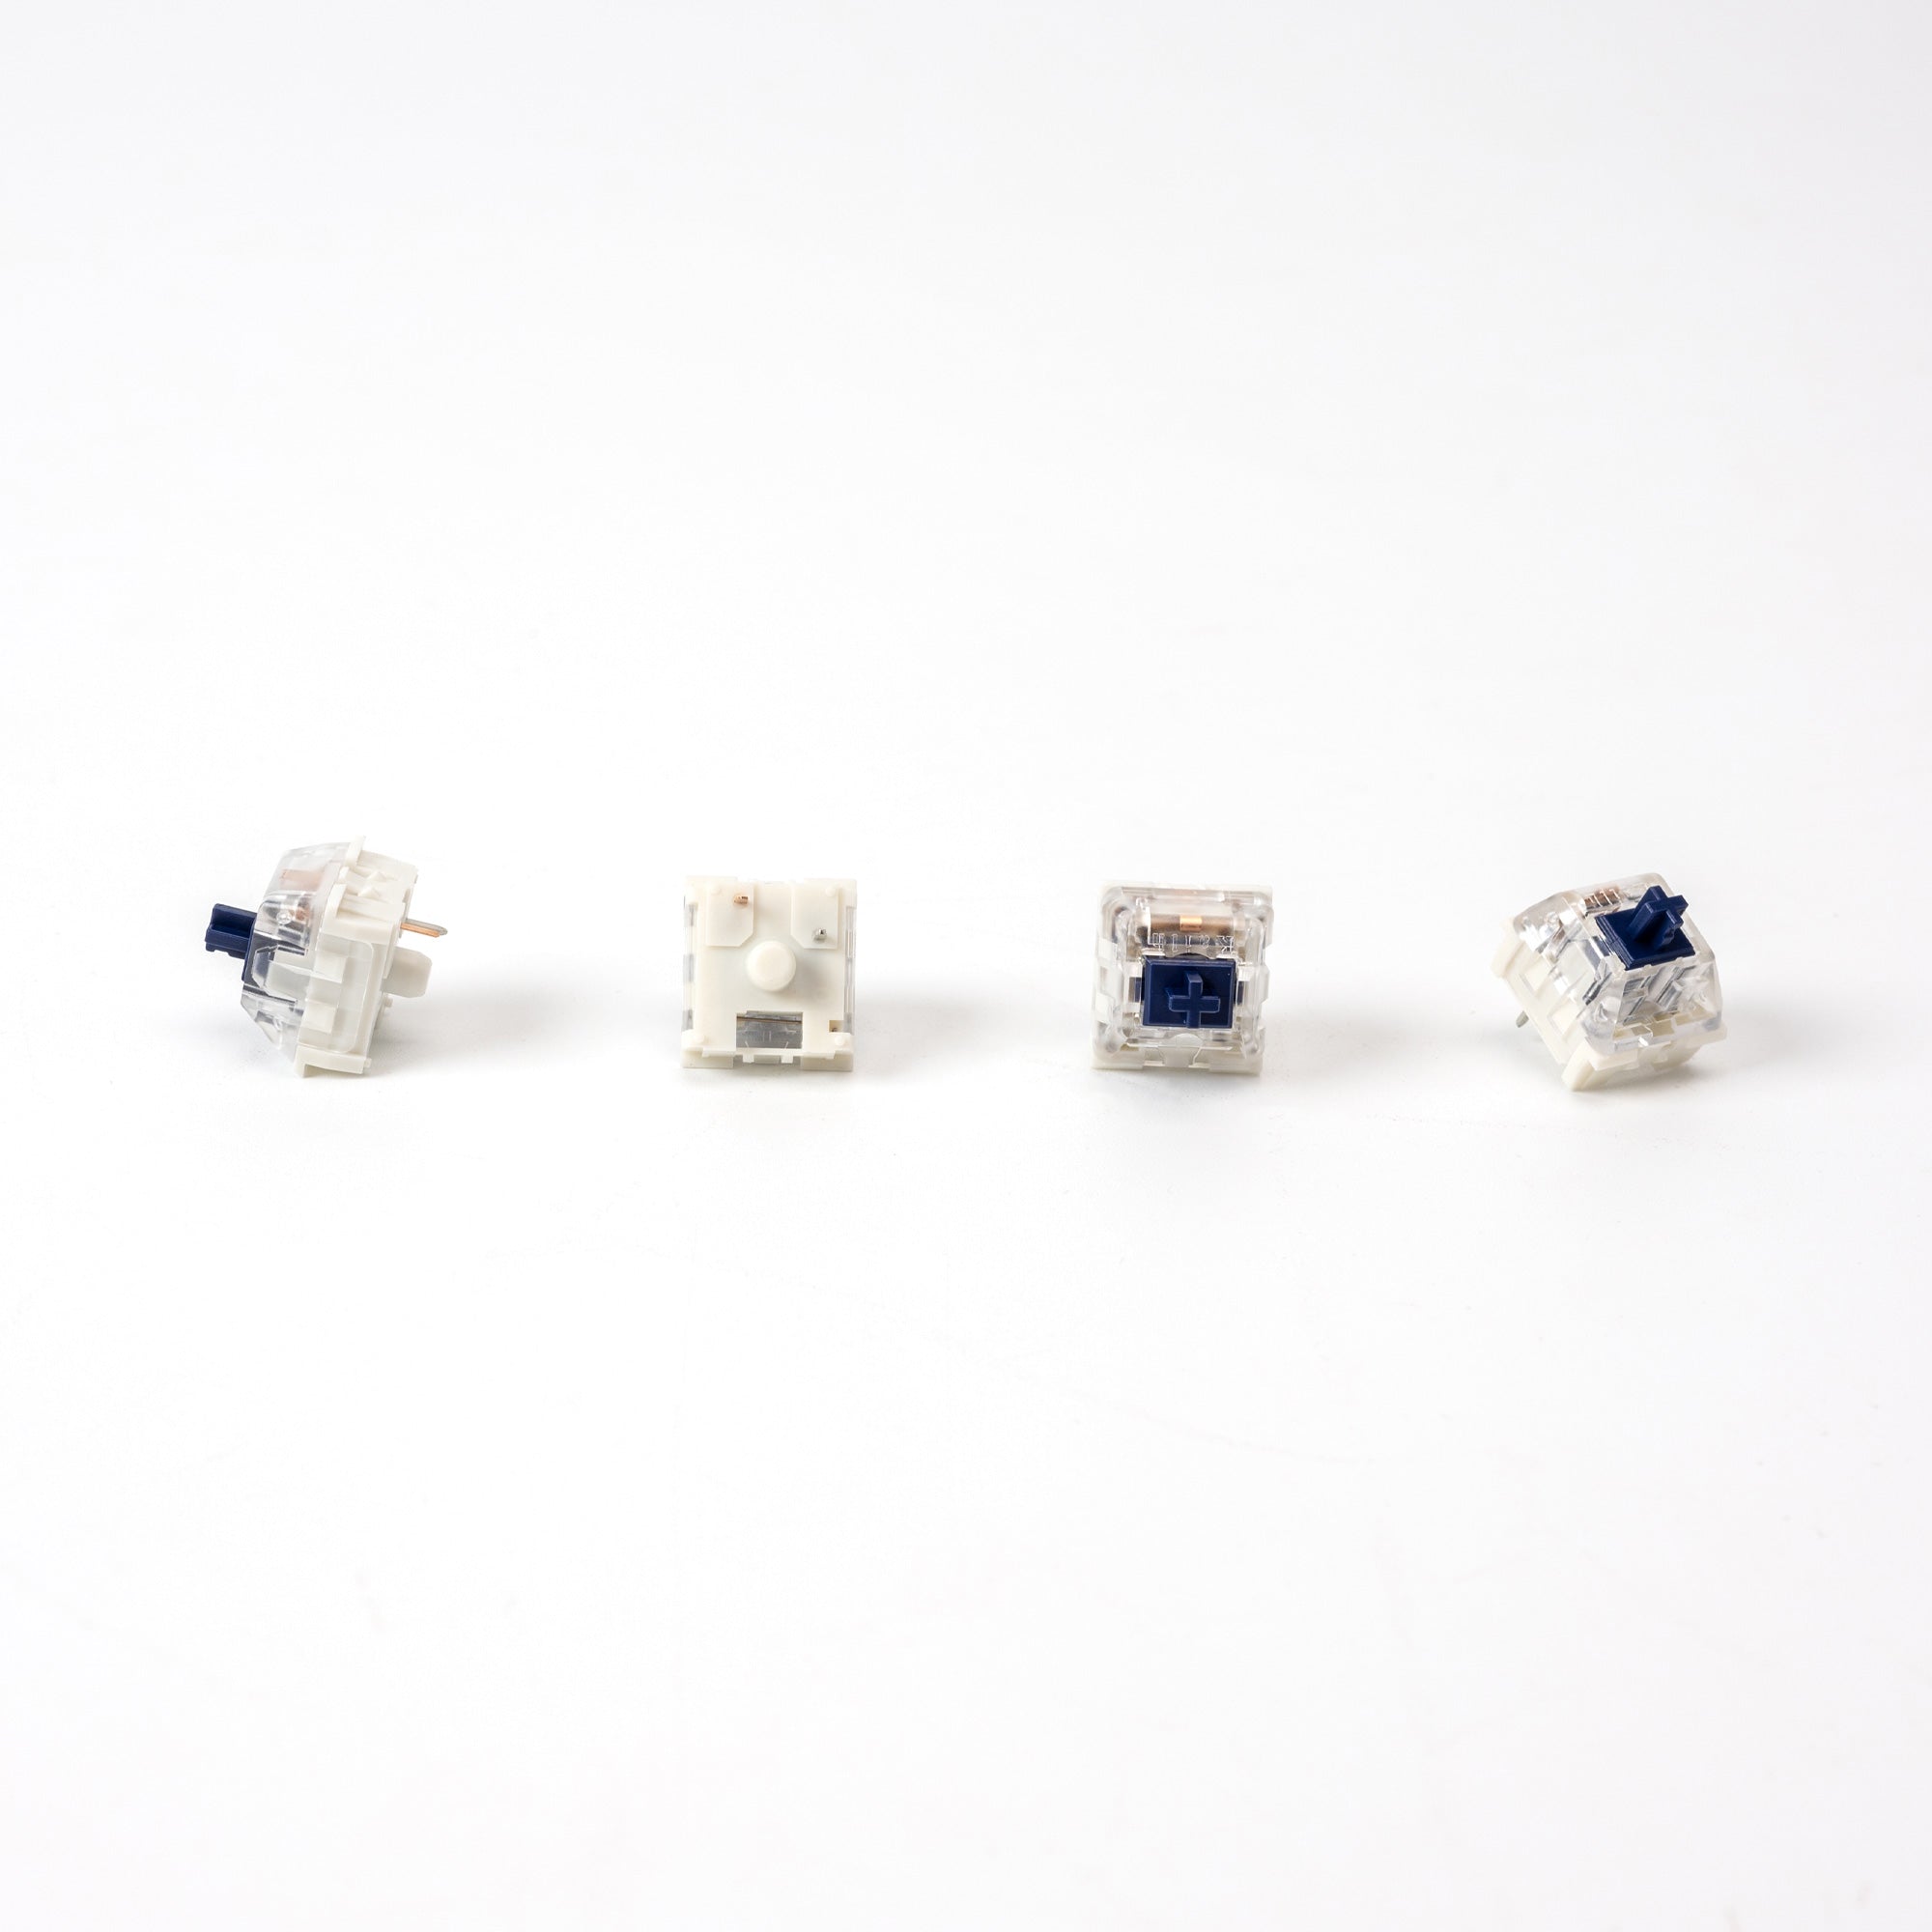 Kailh Speed Pro Heavy Navy Switches